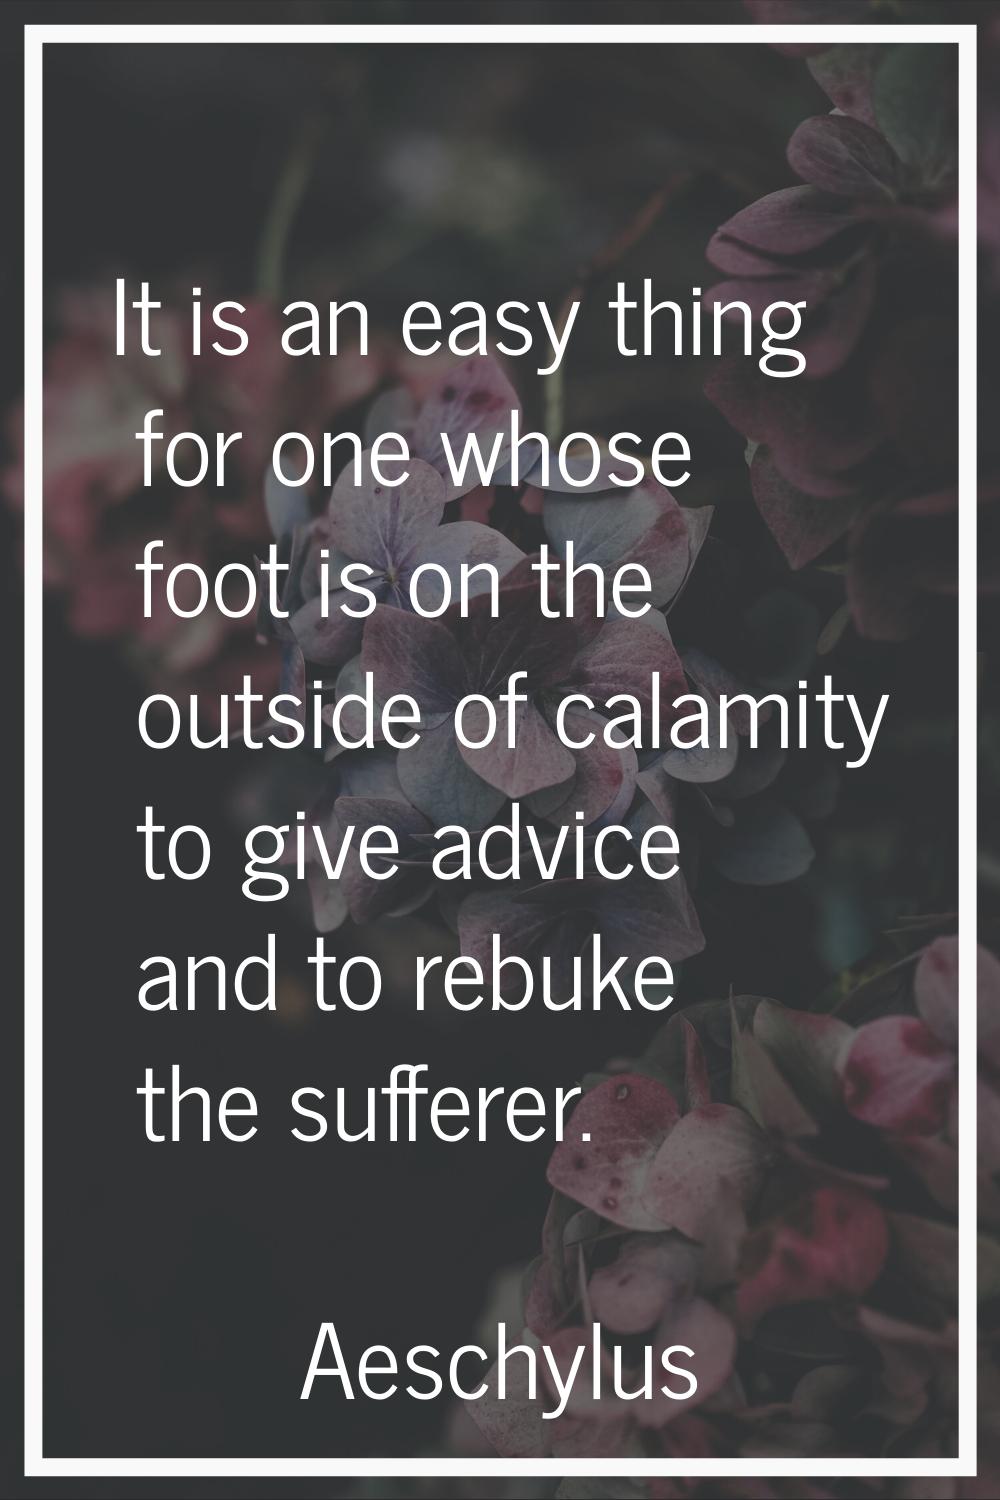 It is an easy thing for one whose foot is on the outside of calamity to give advice and to rebuke t